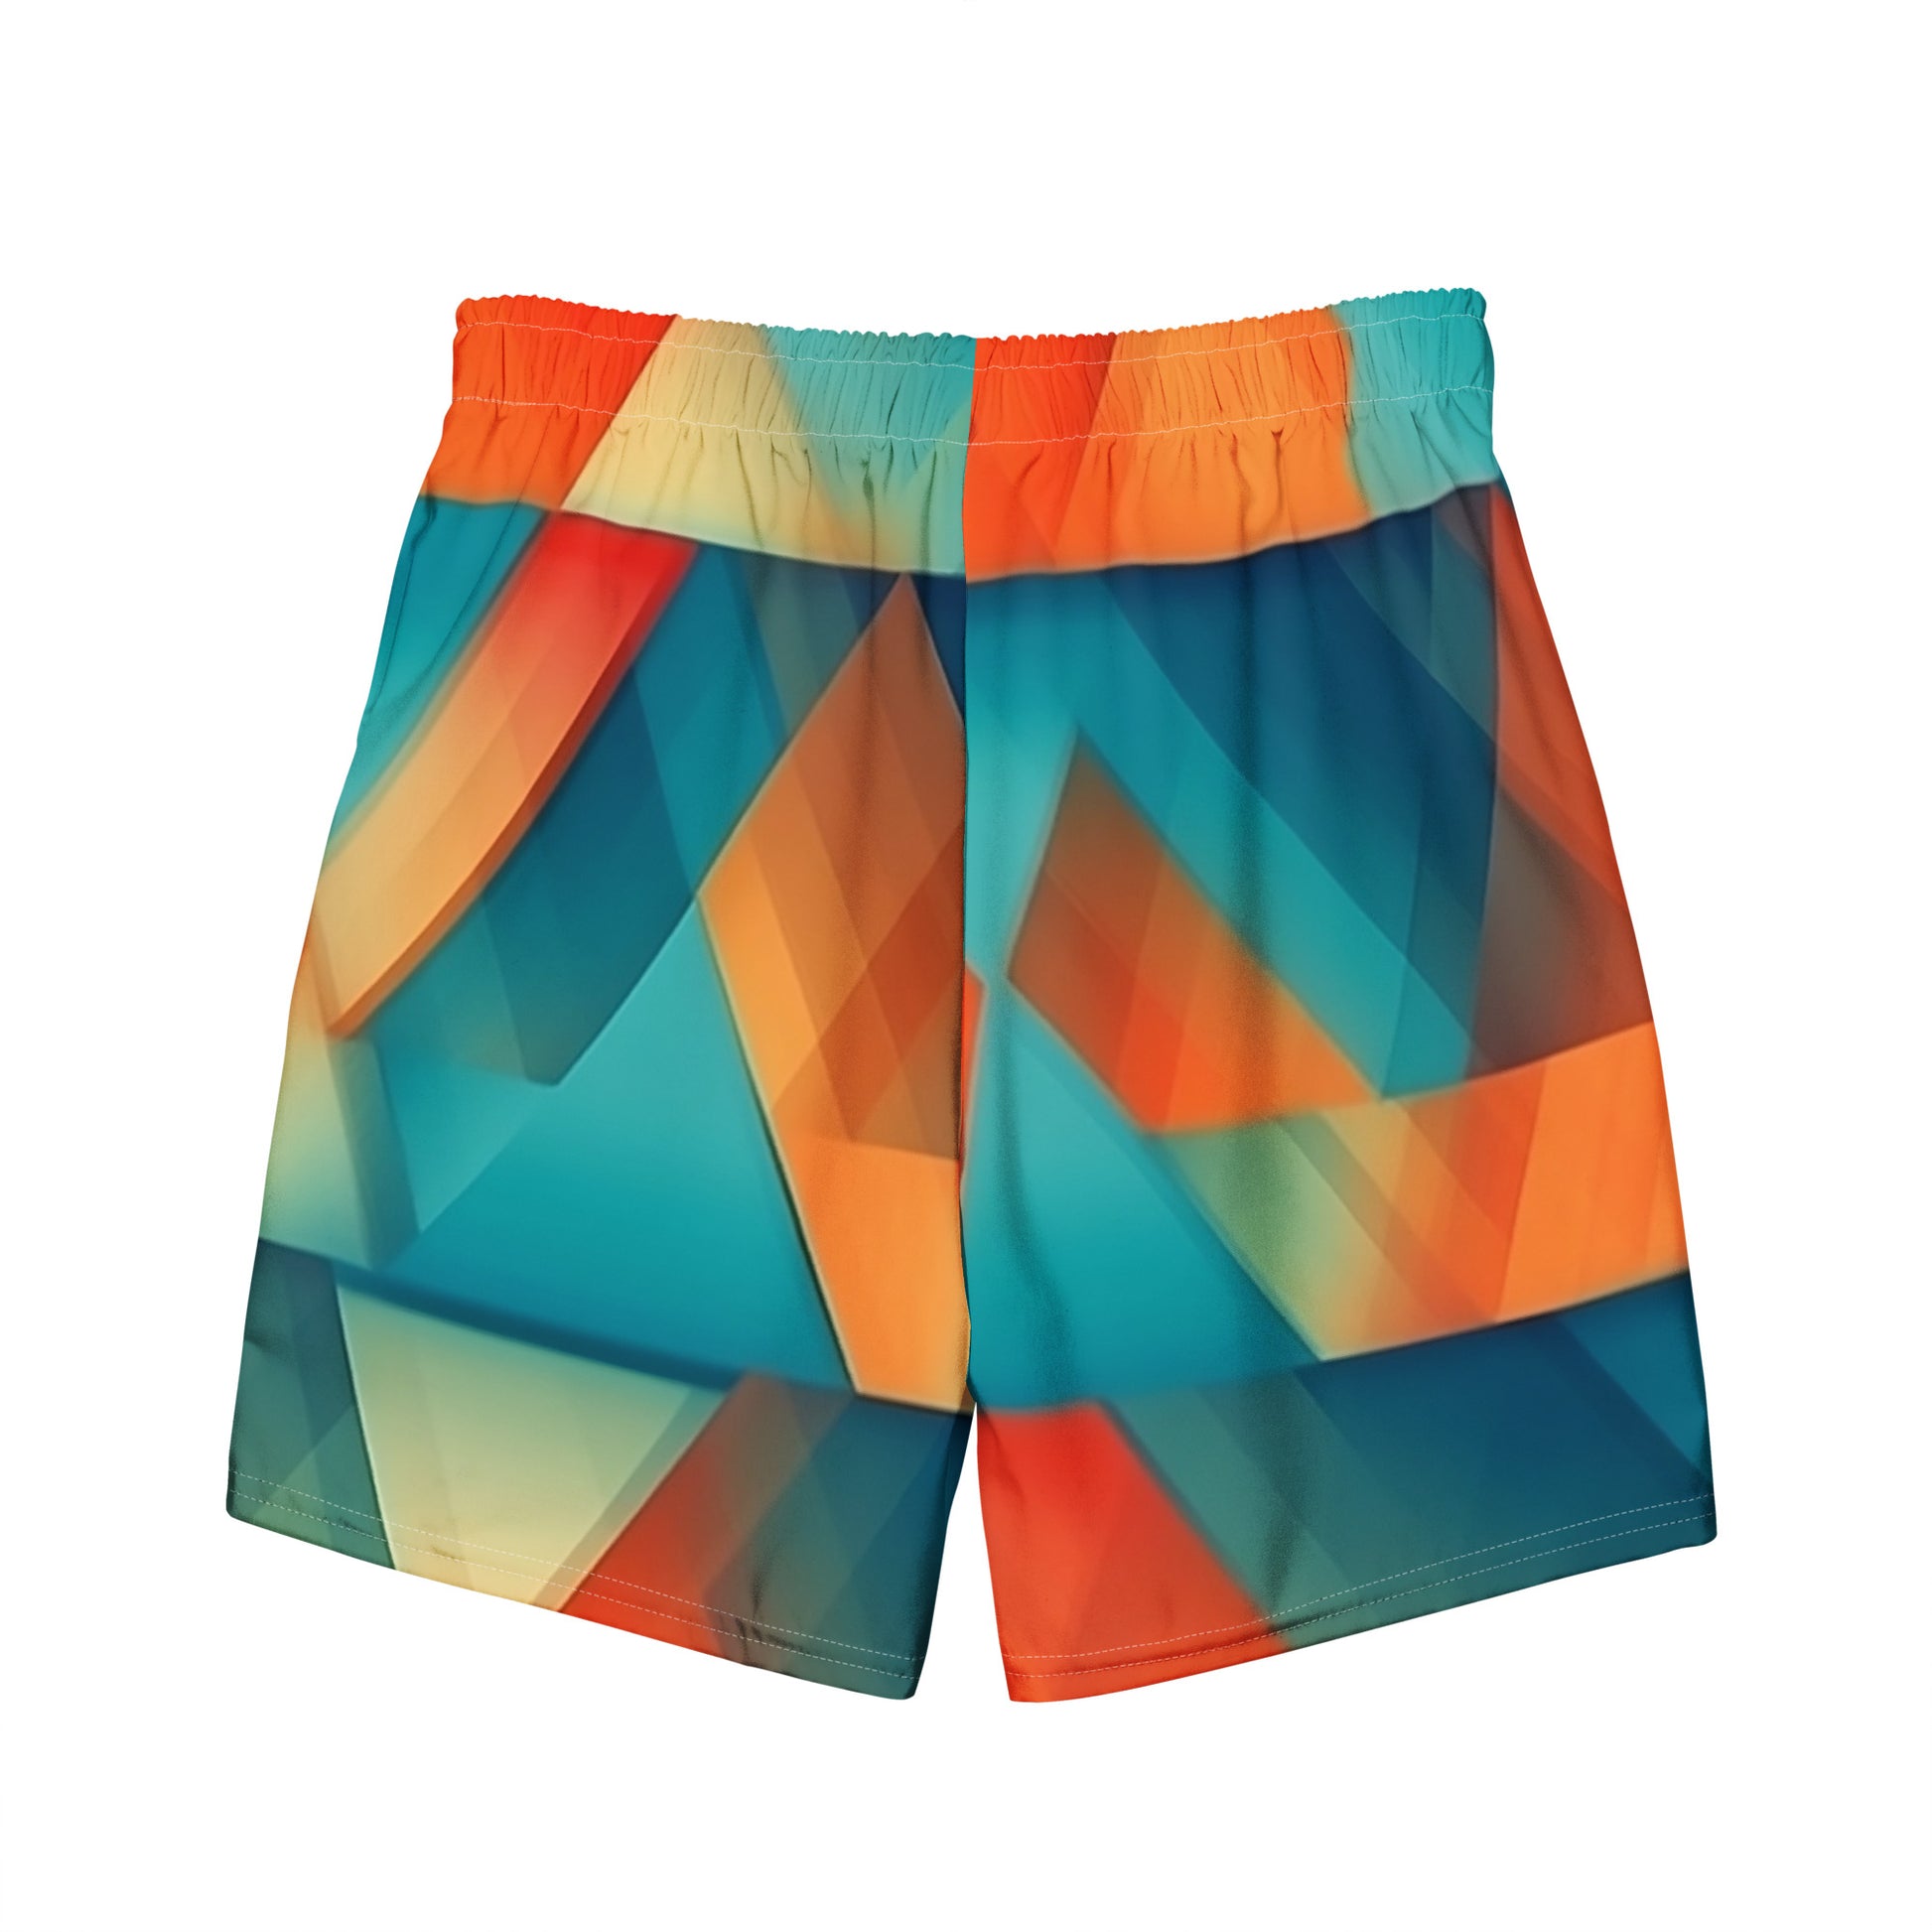 back of prism swim shorts by B.Different Clothing independent streetwear inspired by street art graffiti